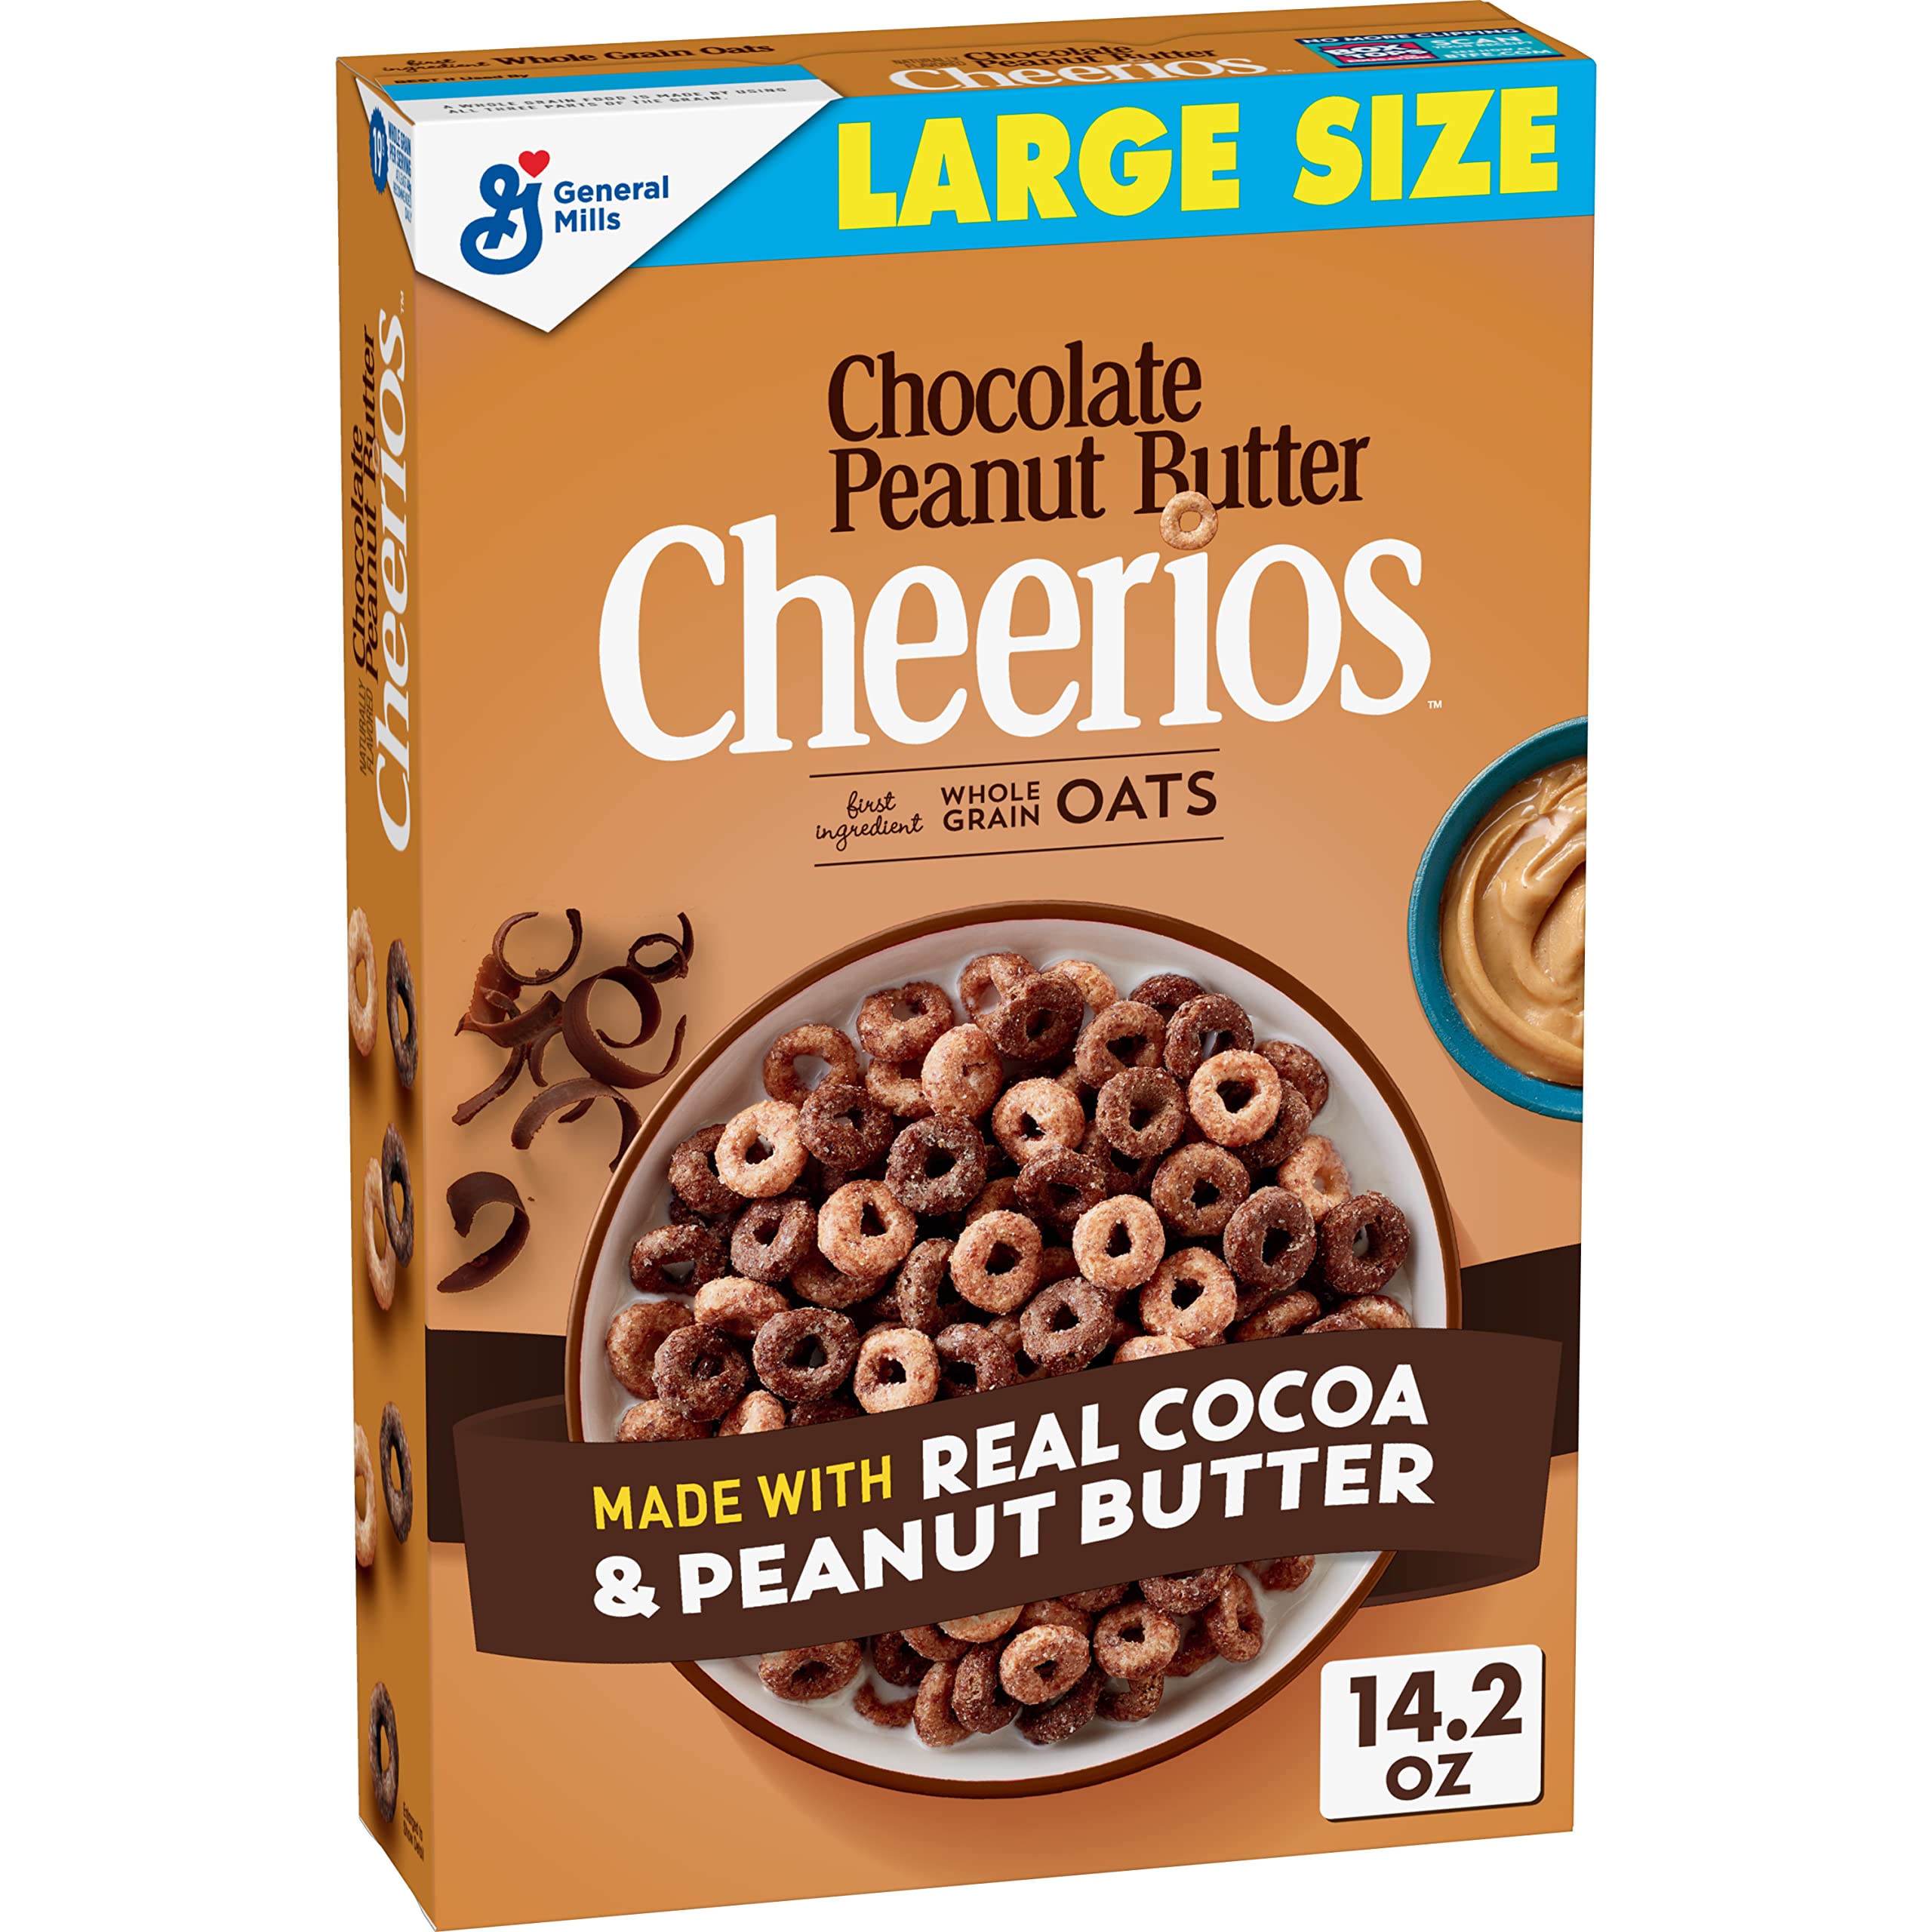 14.2-Oz Chocolate Peanut Butter Cheerios Breakfast Cereal (Large Size) $3.13 w/ S&S + Free Shipping w/ Prime or Orders $25